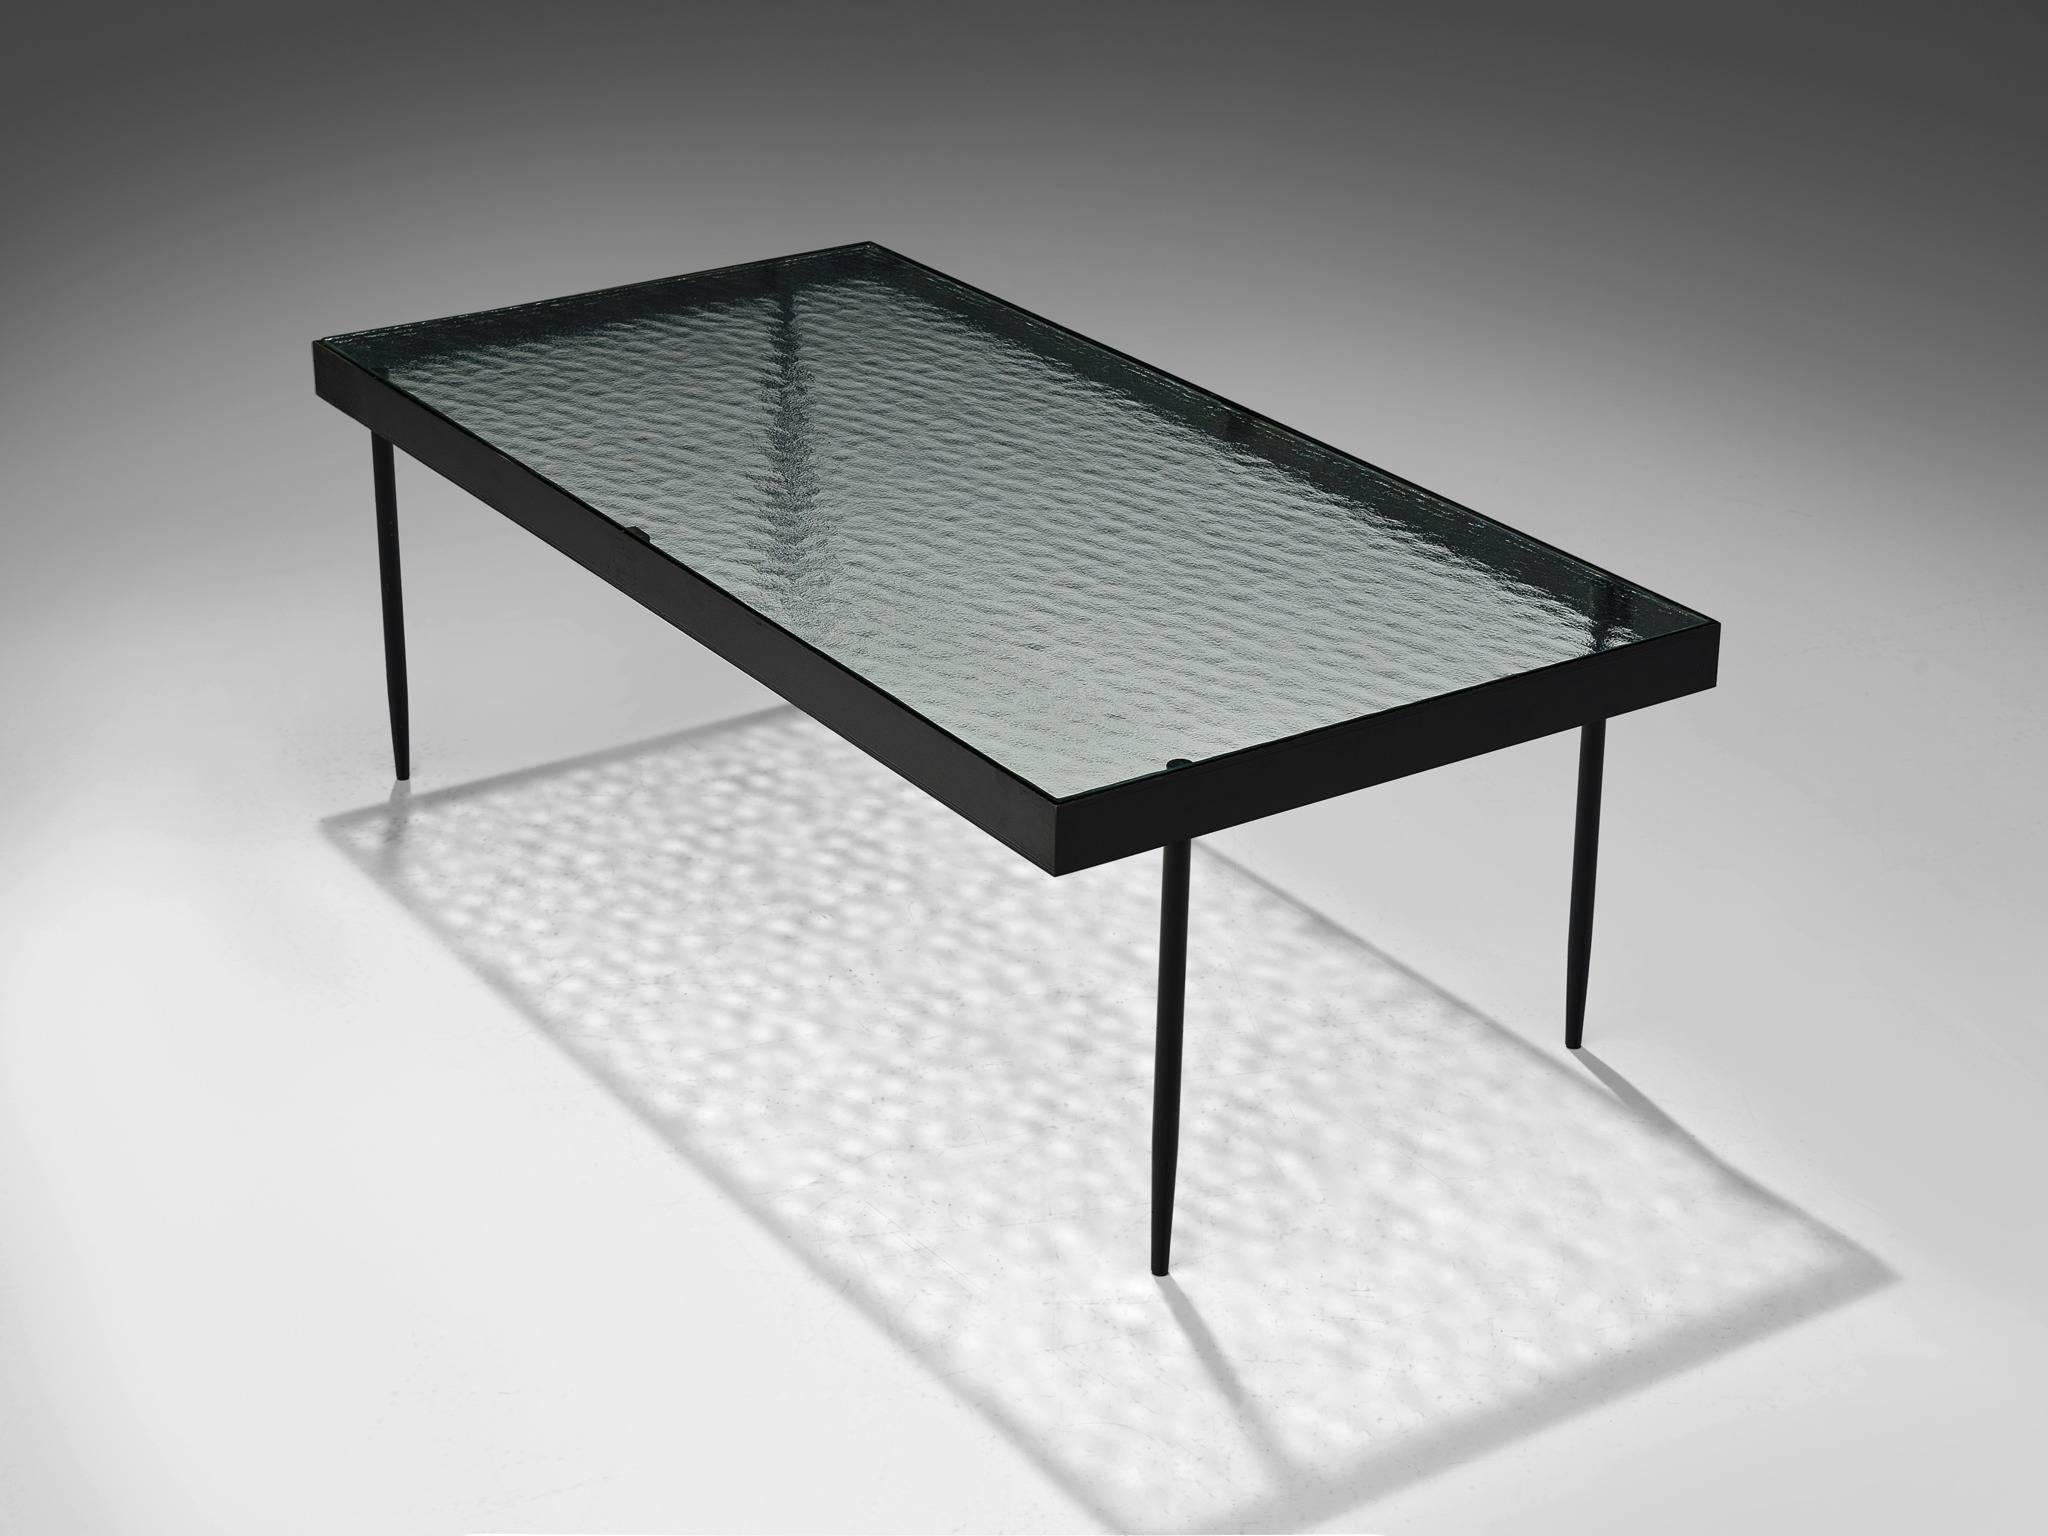 Janni Van Pelt for Bas Van Pelt, coffee table, glass, metal, Netherlands, 1958. 

This is a rare rectangular coffee table is designed by Janni Van Pelt for Bas Van Pelt. The table is made from reinforced glass with delicate tapered legs and a